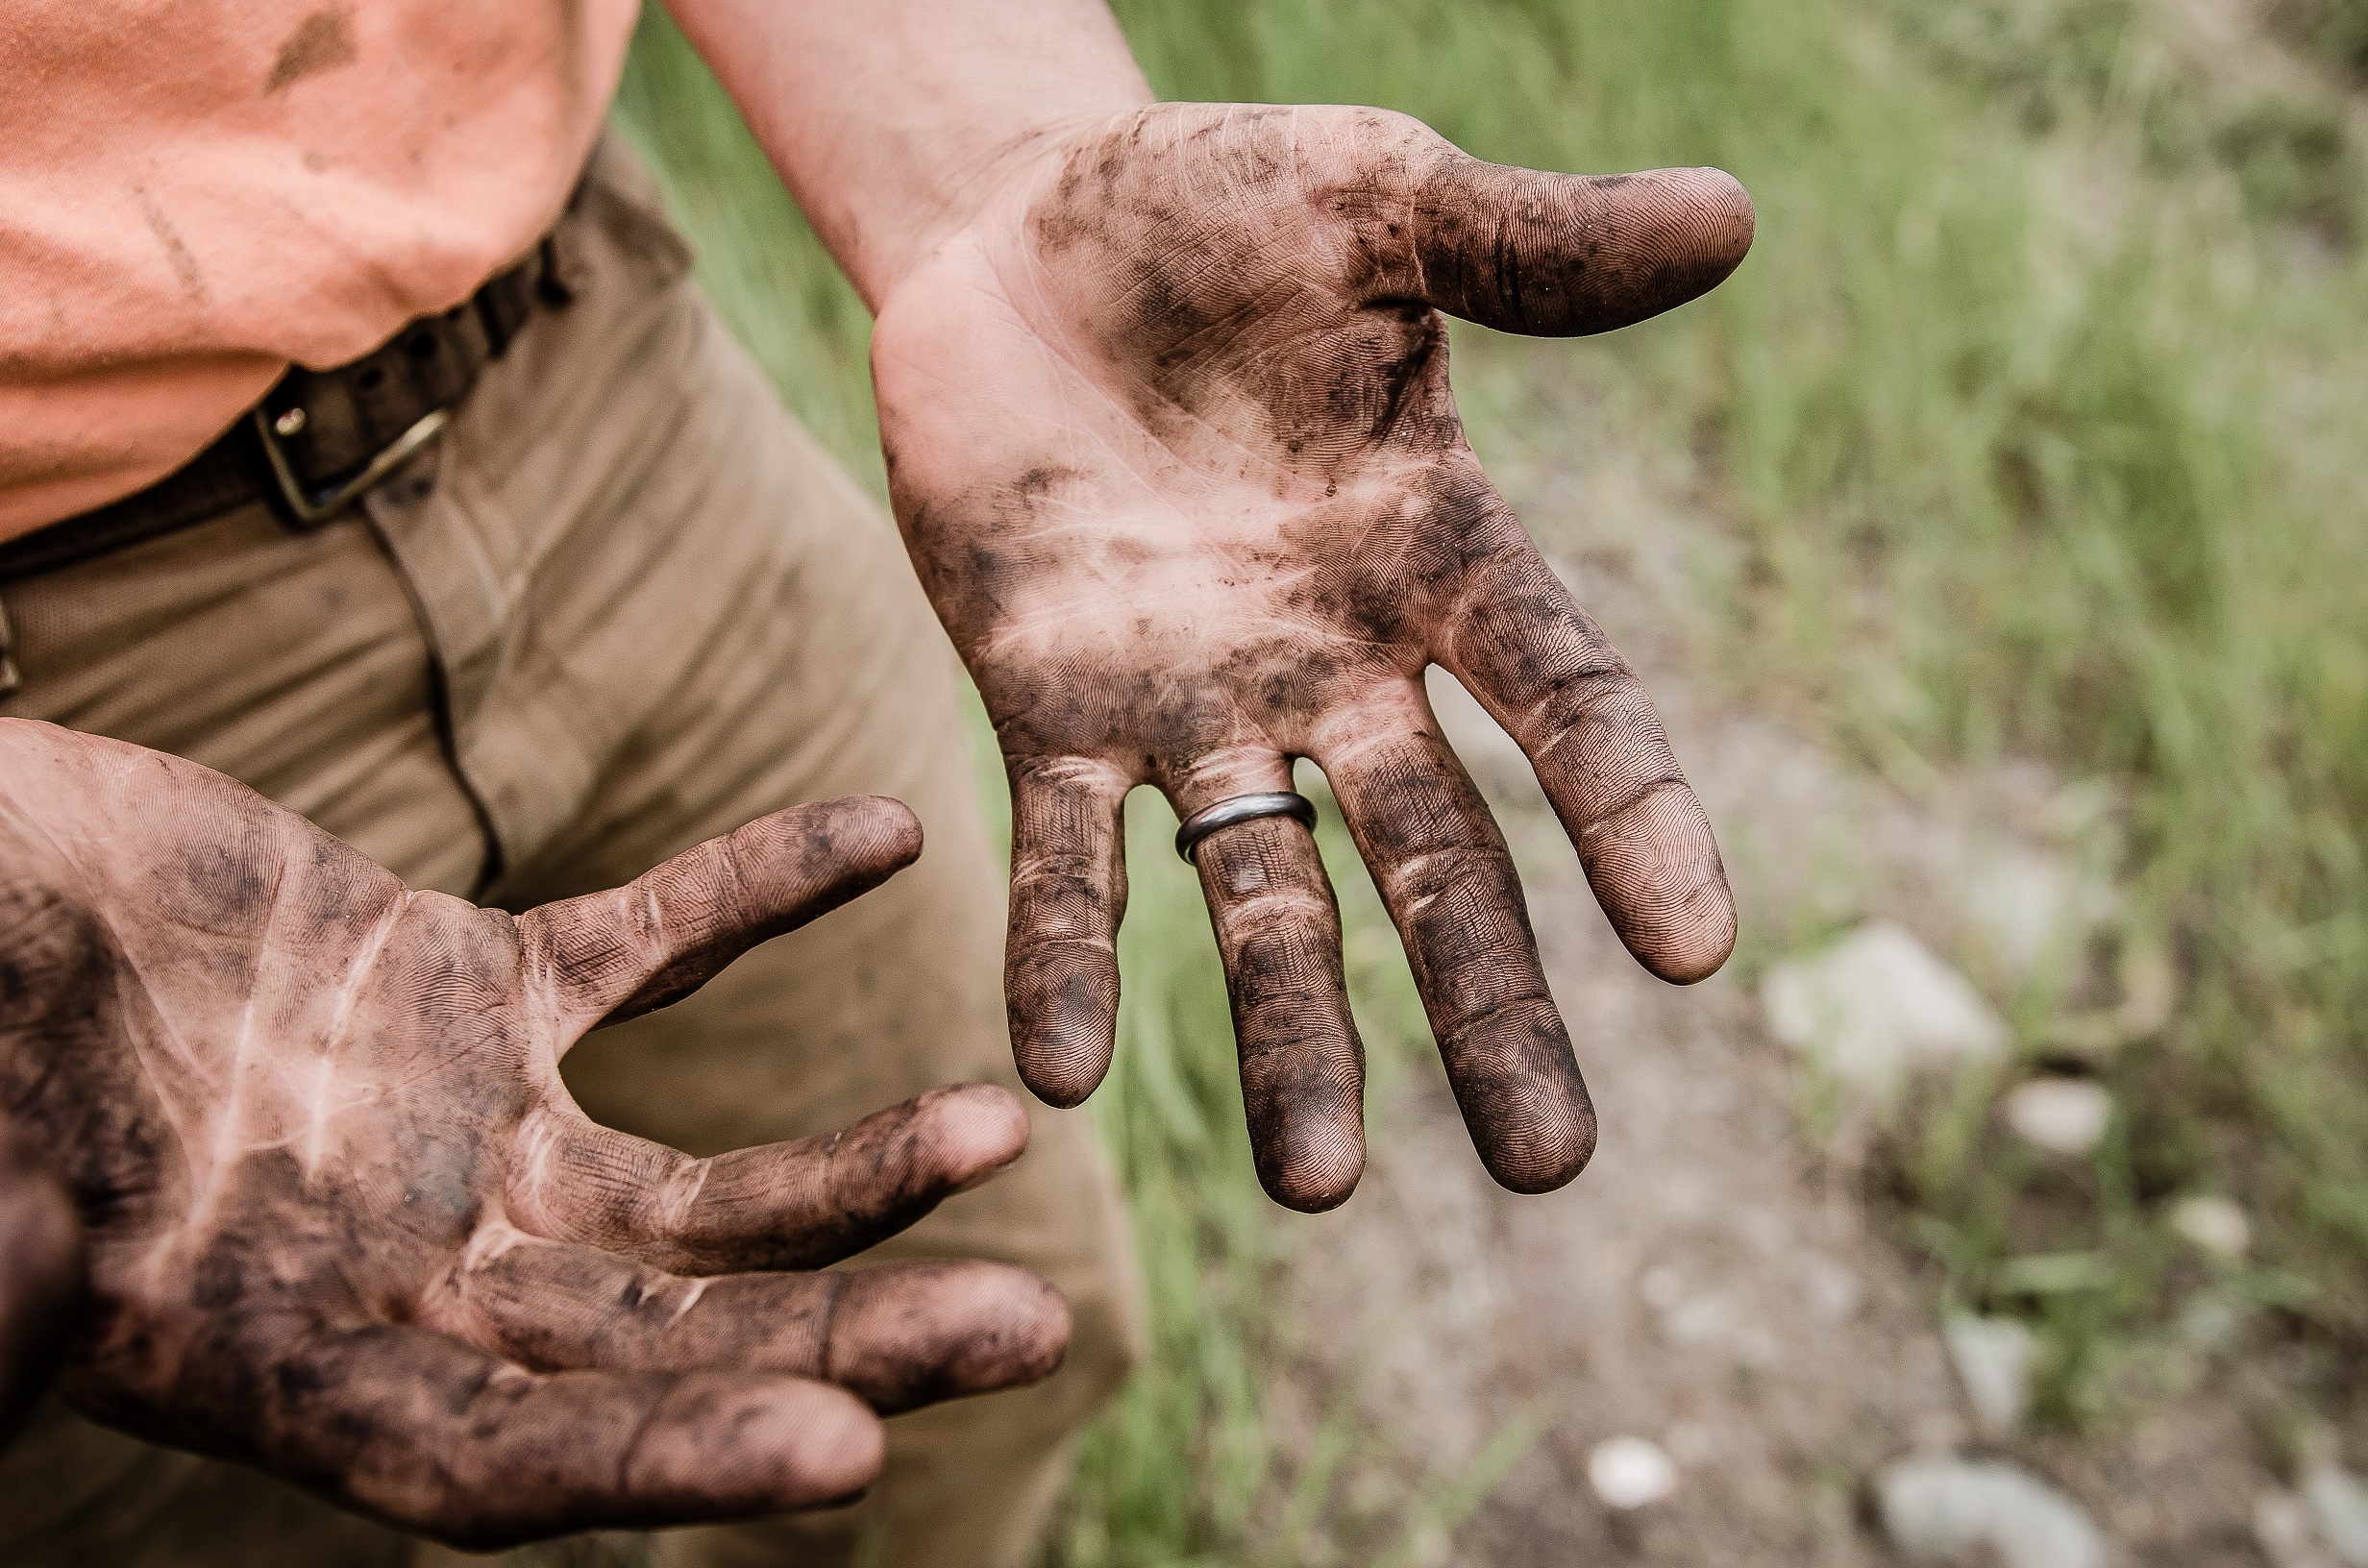 Dirty hands after a long day of work.